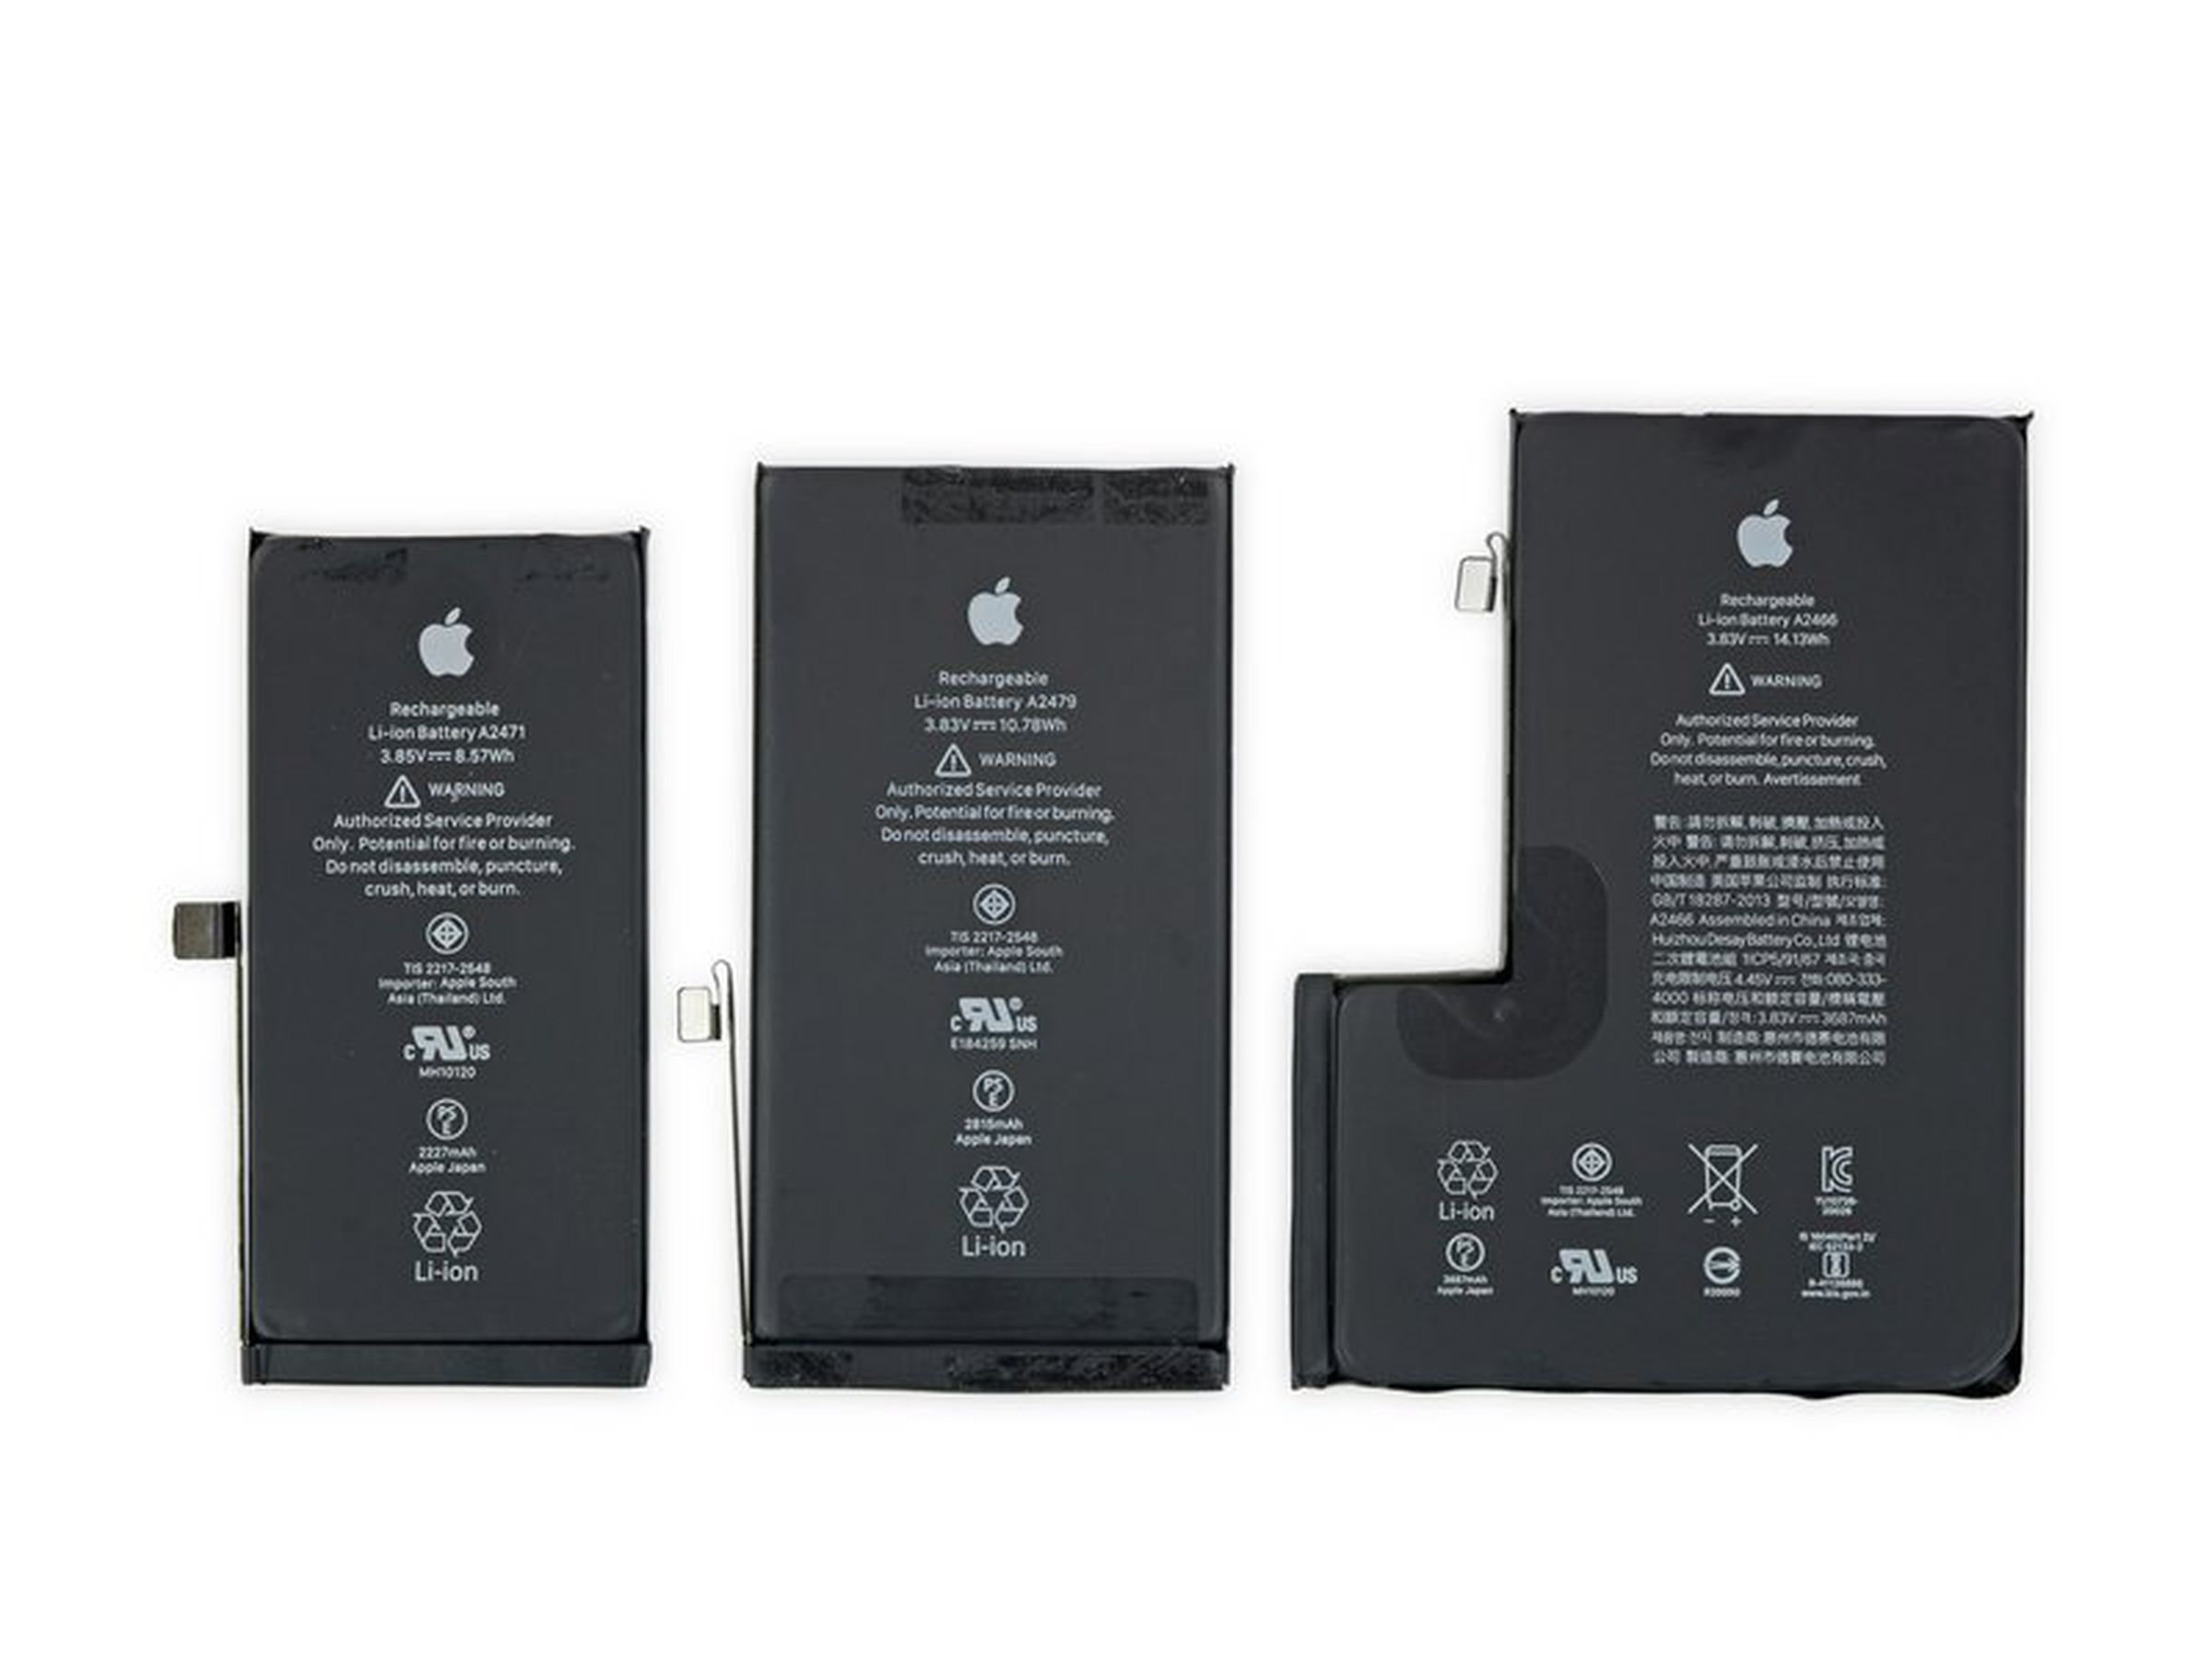 The iPhone 12 Pro Max battery (right) dwarfs the other iPhone 12 model batteries.